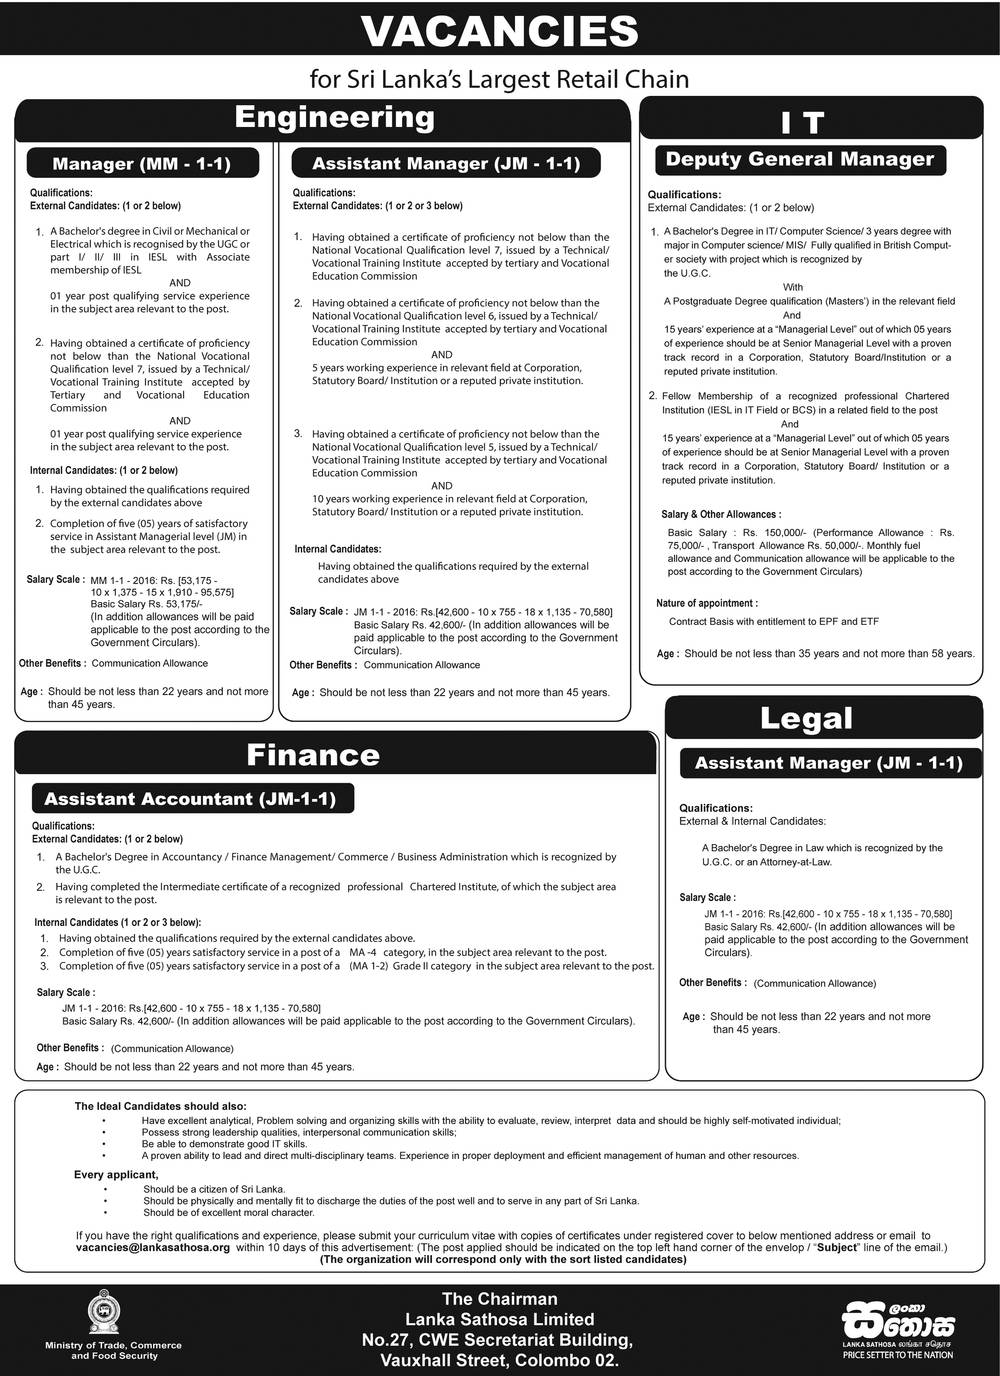 Manager, Assistant Manager, Deputy General Manager, Assistant Accountant - Lanka Sathosa Limited